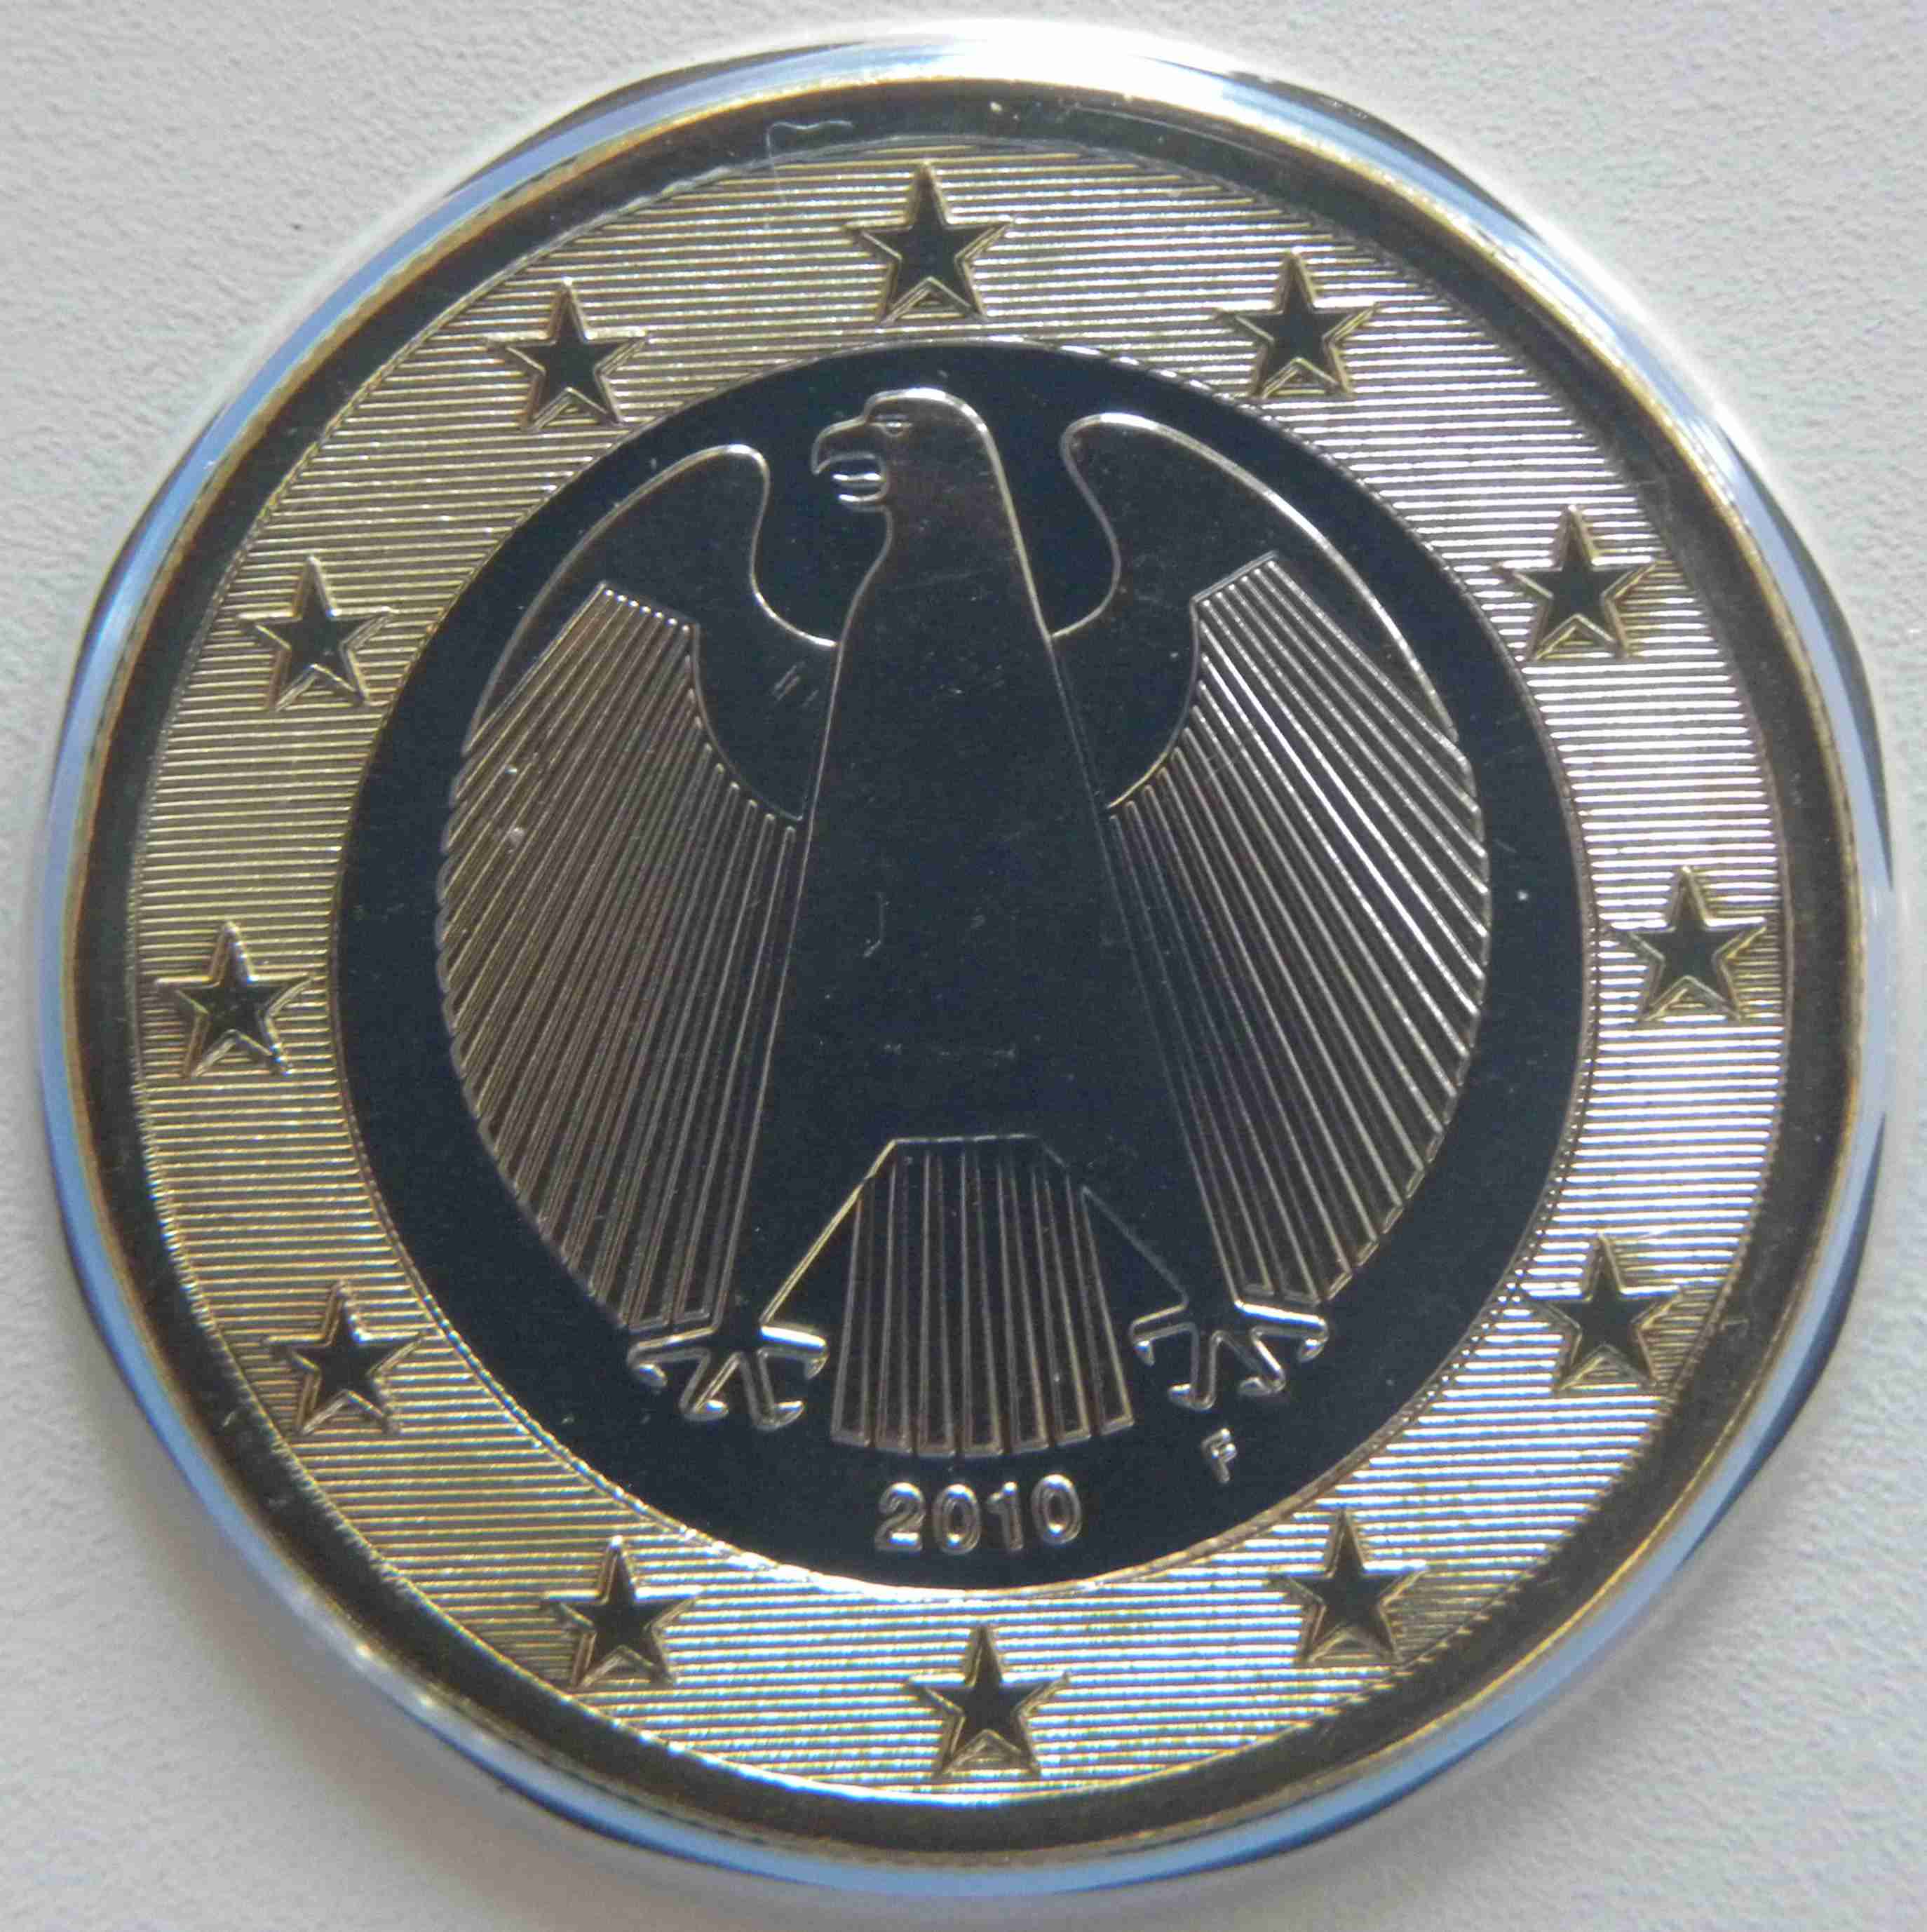 Germany 1 Euro Coin 2010 F - euro-coins.tv - The Online ...